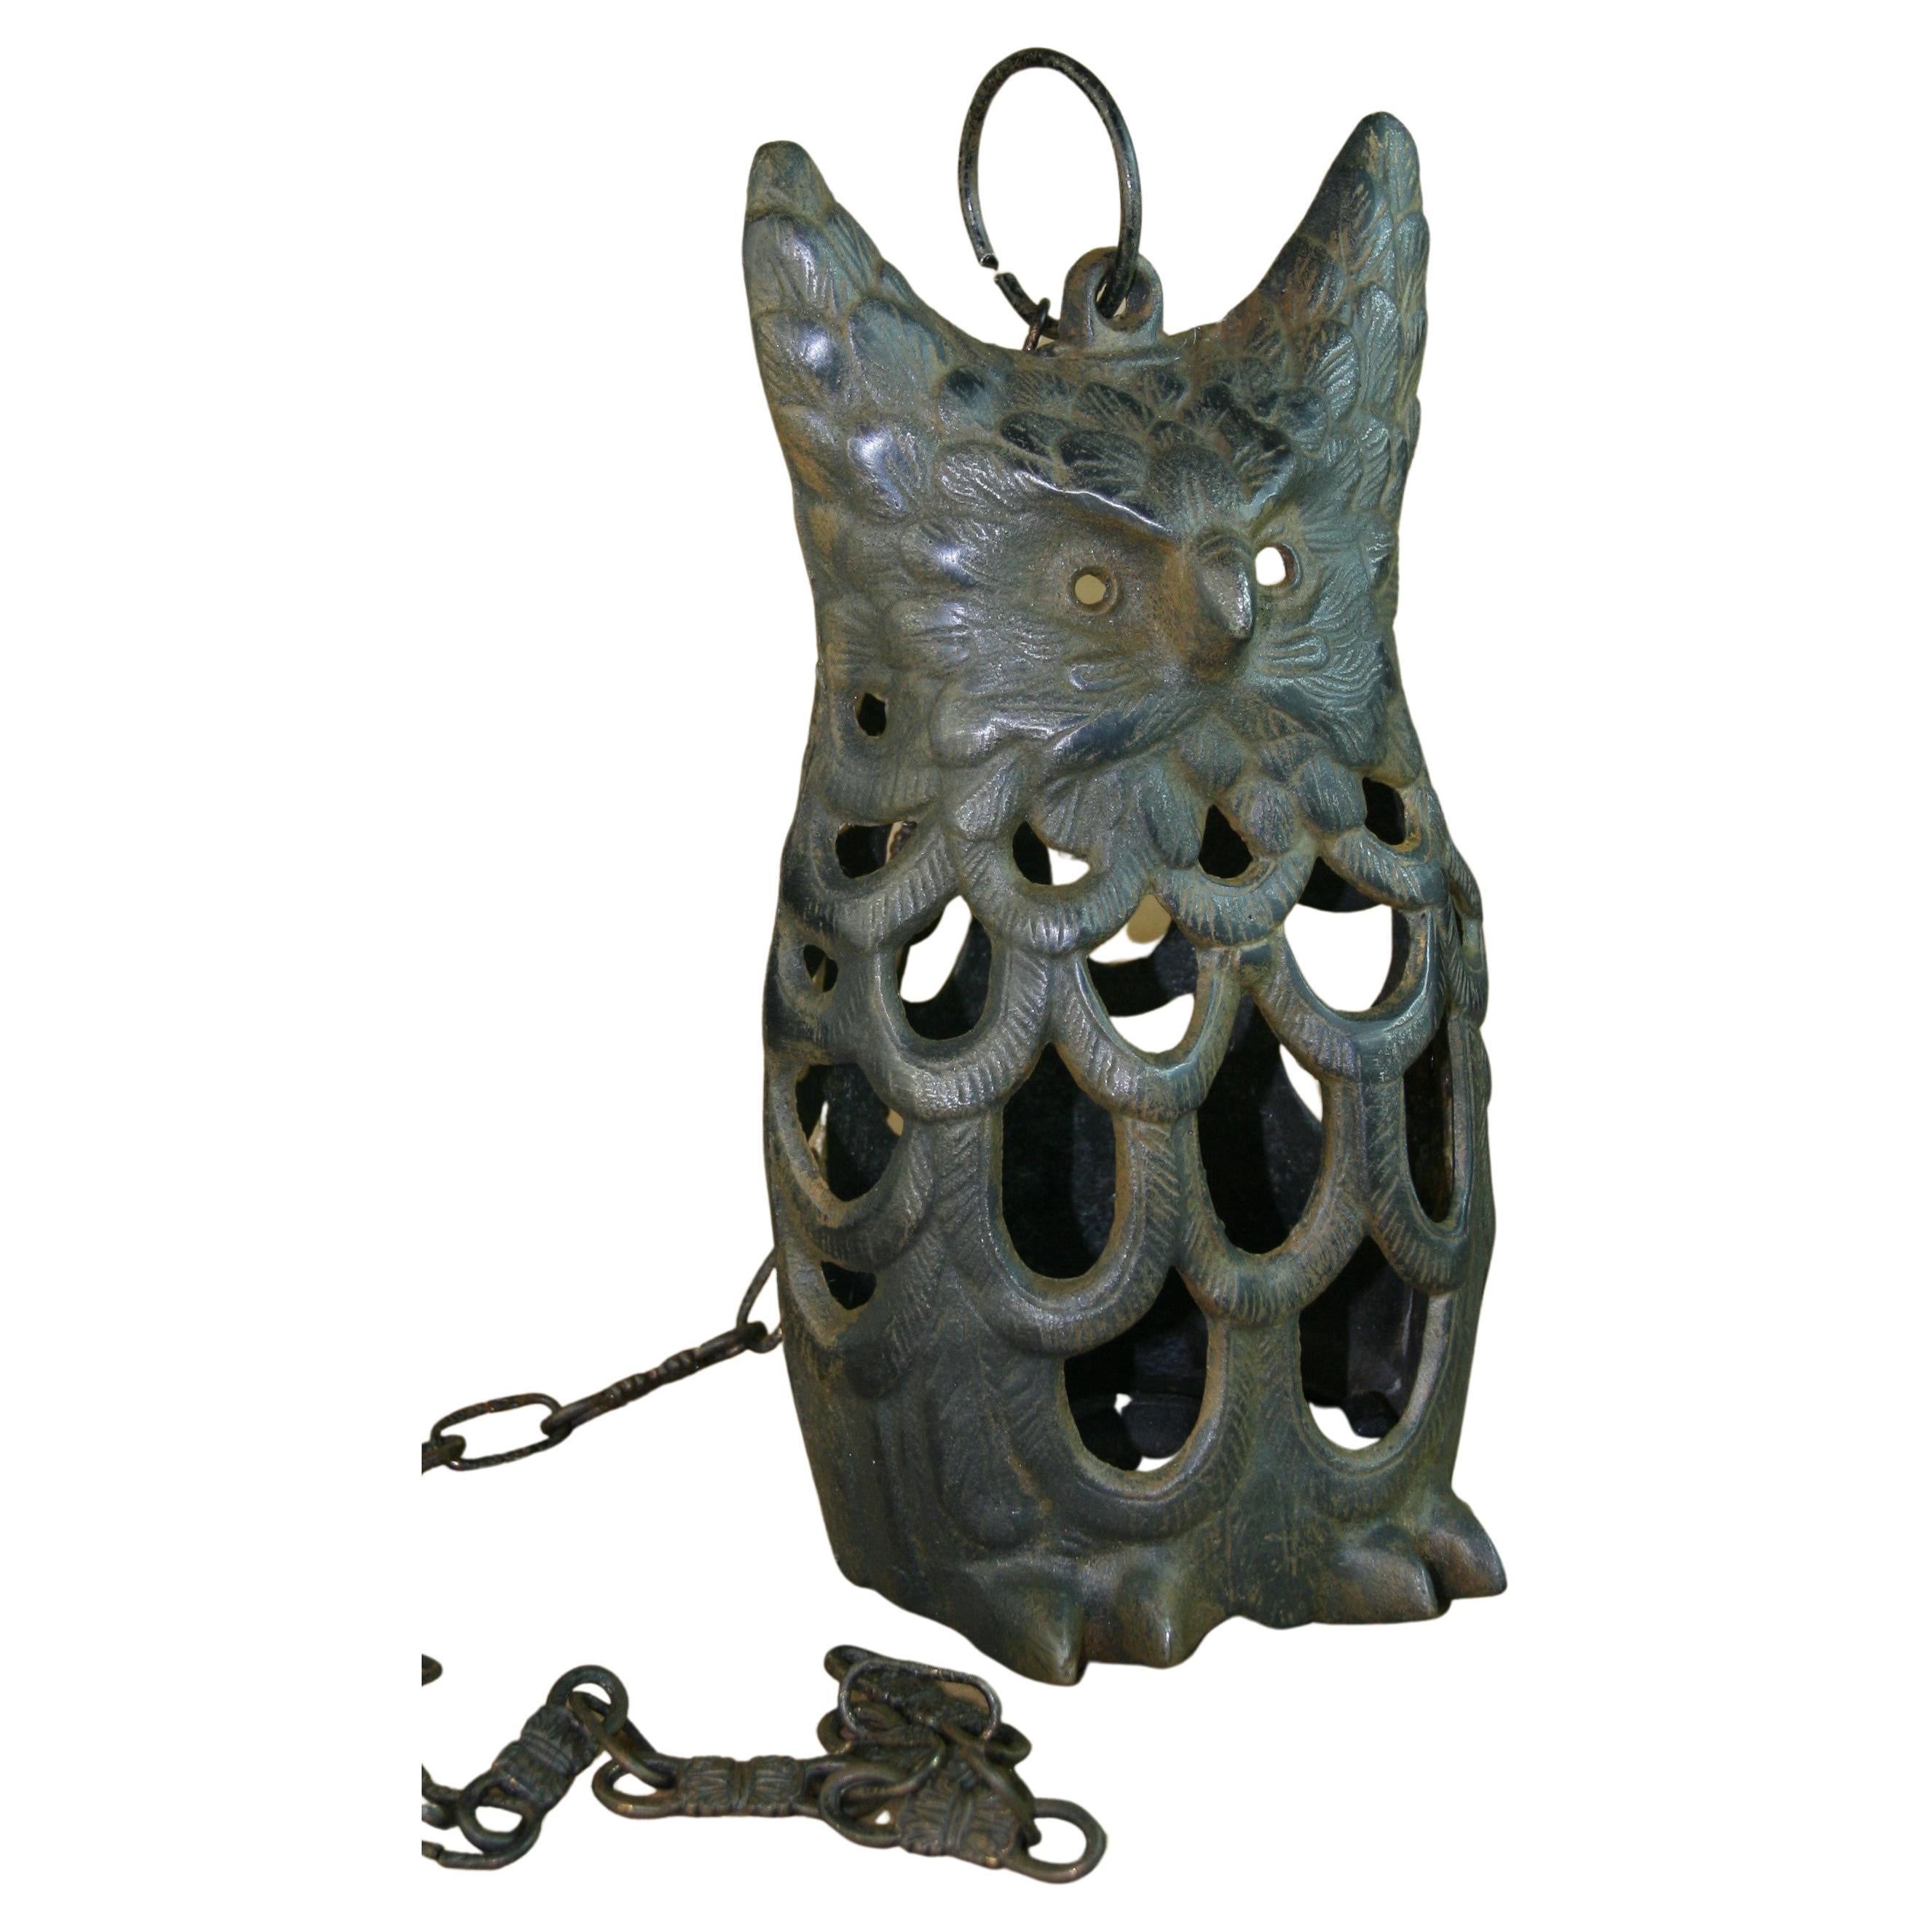 Japanese Rare Oversized Owl Garden Candle Lantern with Antique Chain